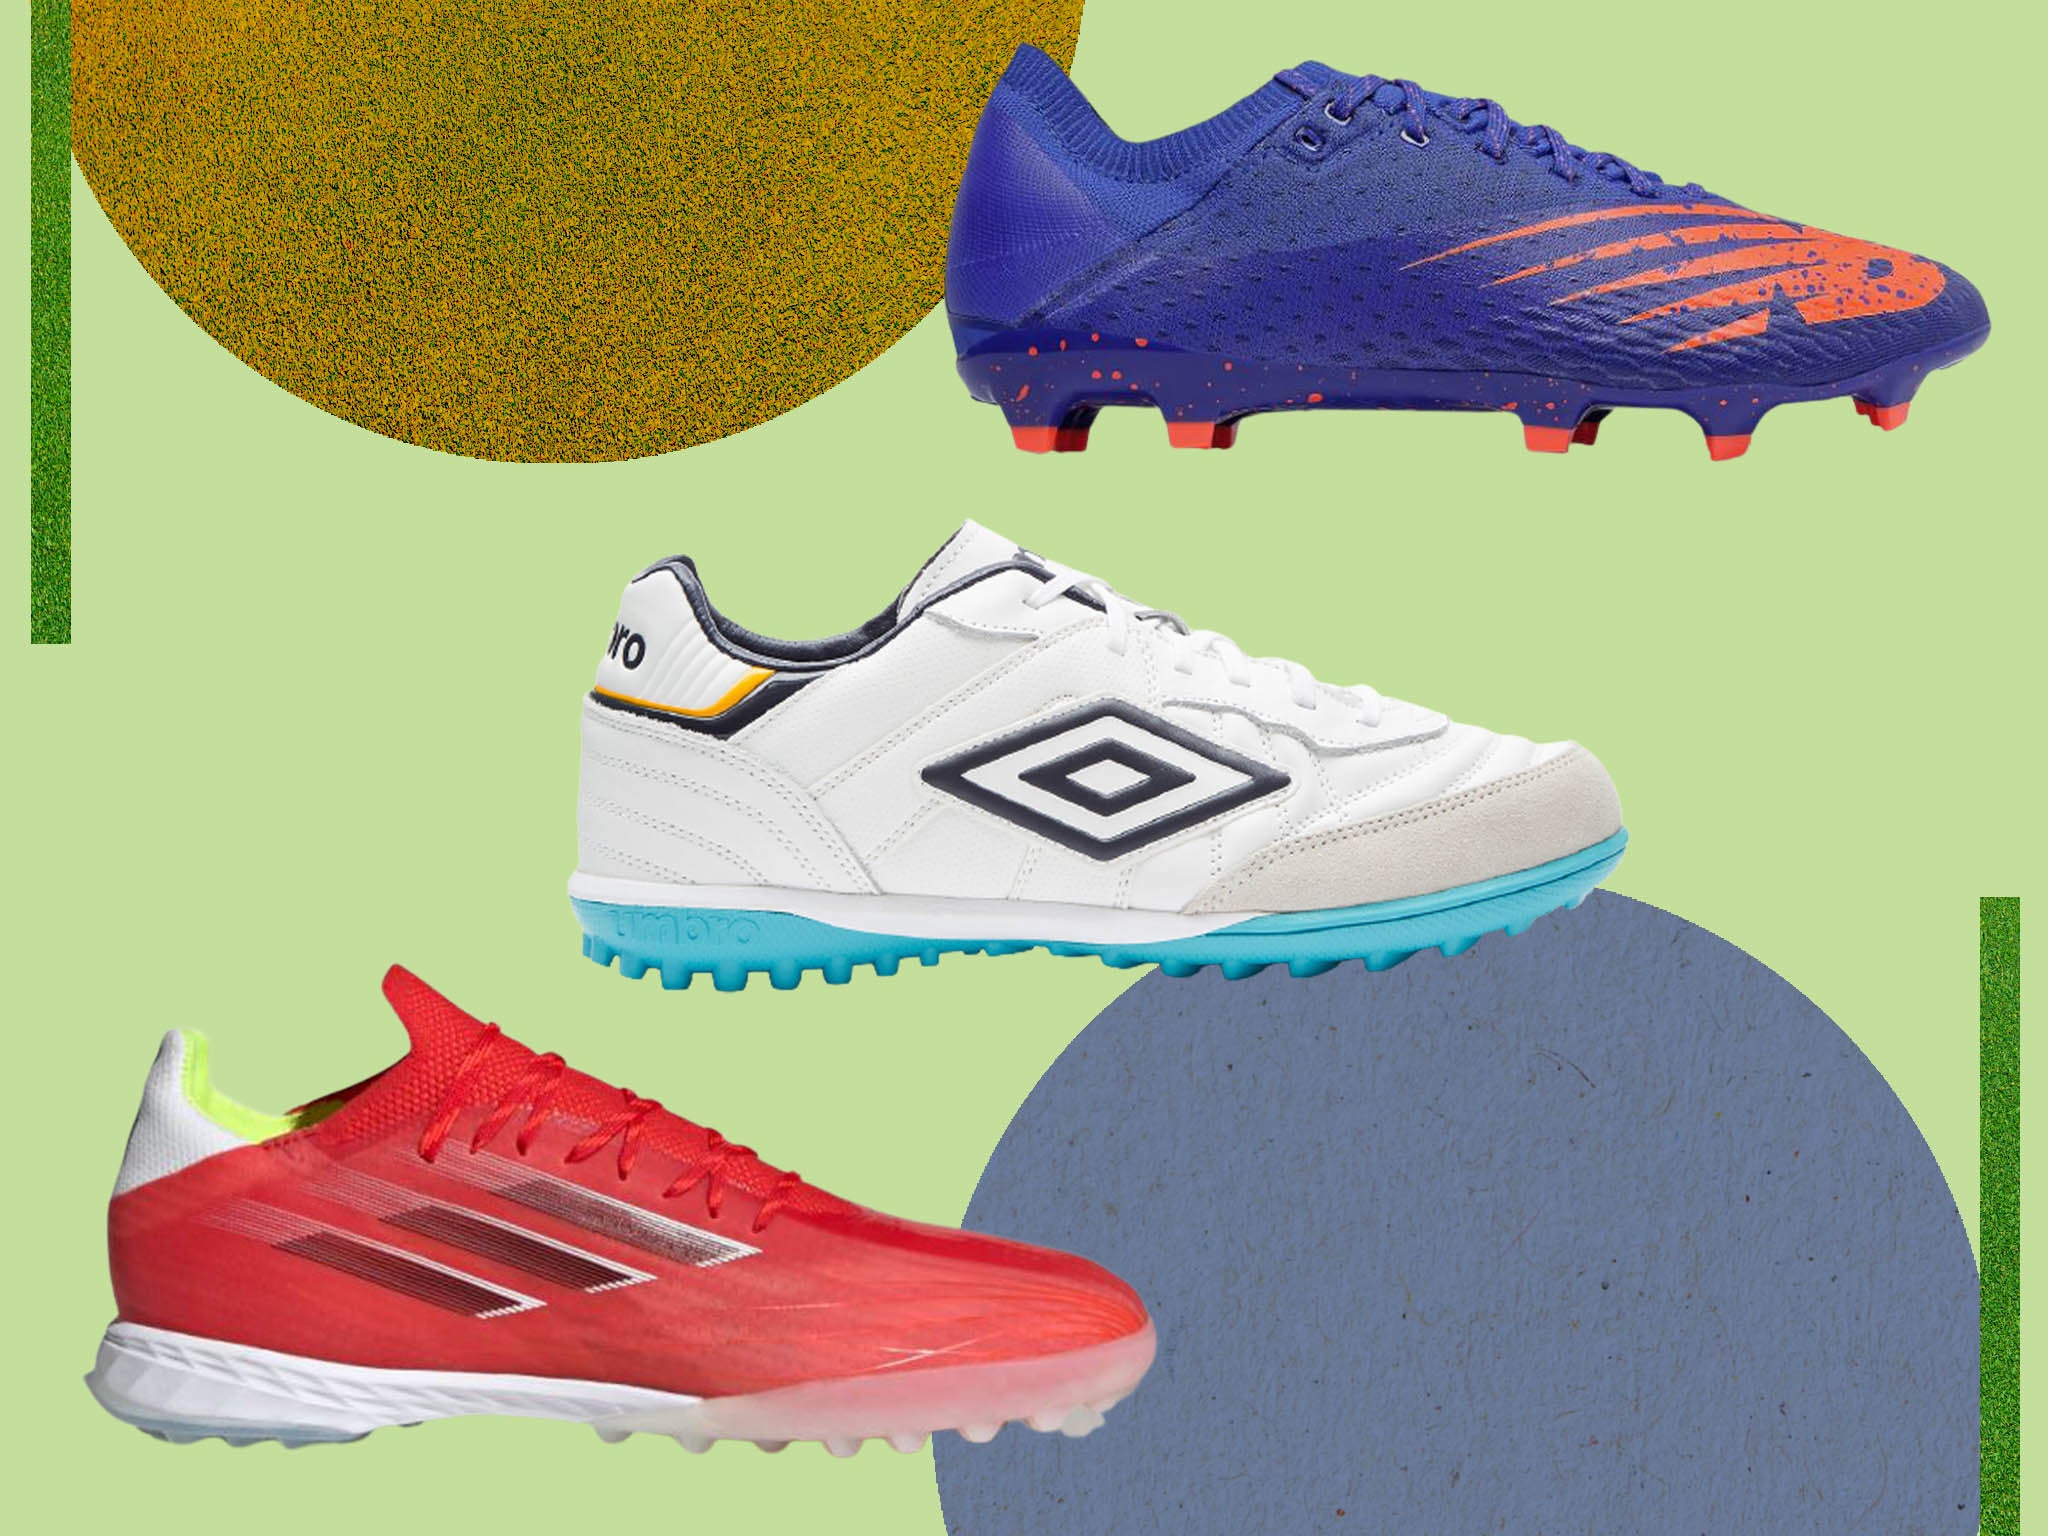 We tried sneaks for every budget, testing for shot and pass control, acceleration, fit and looks